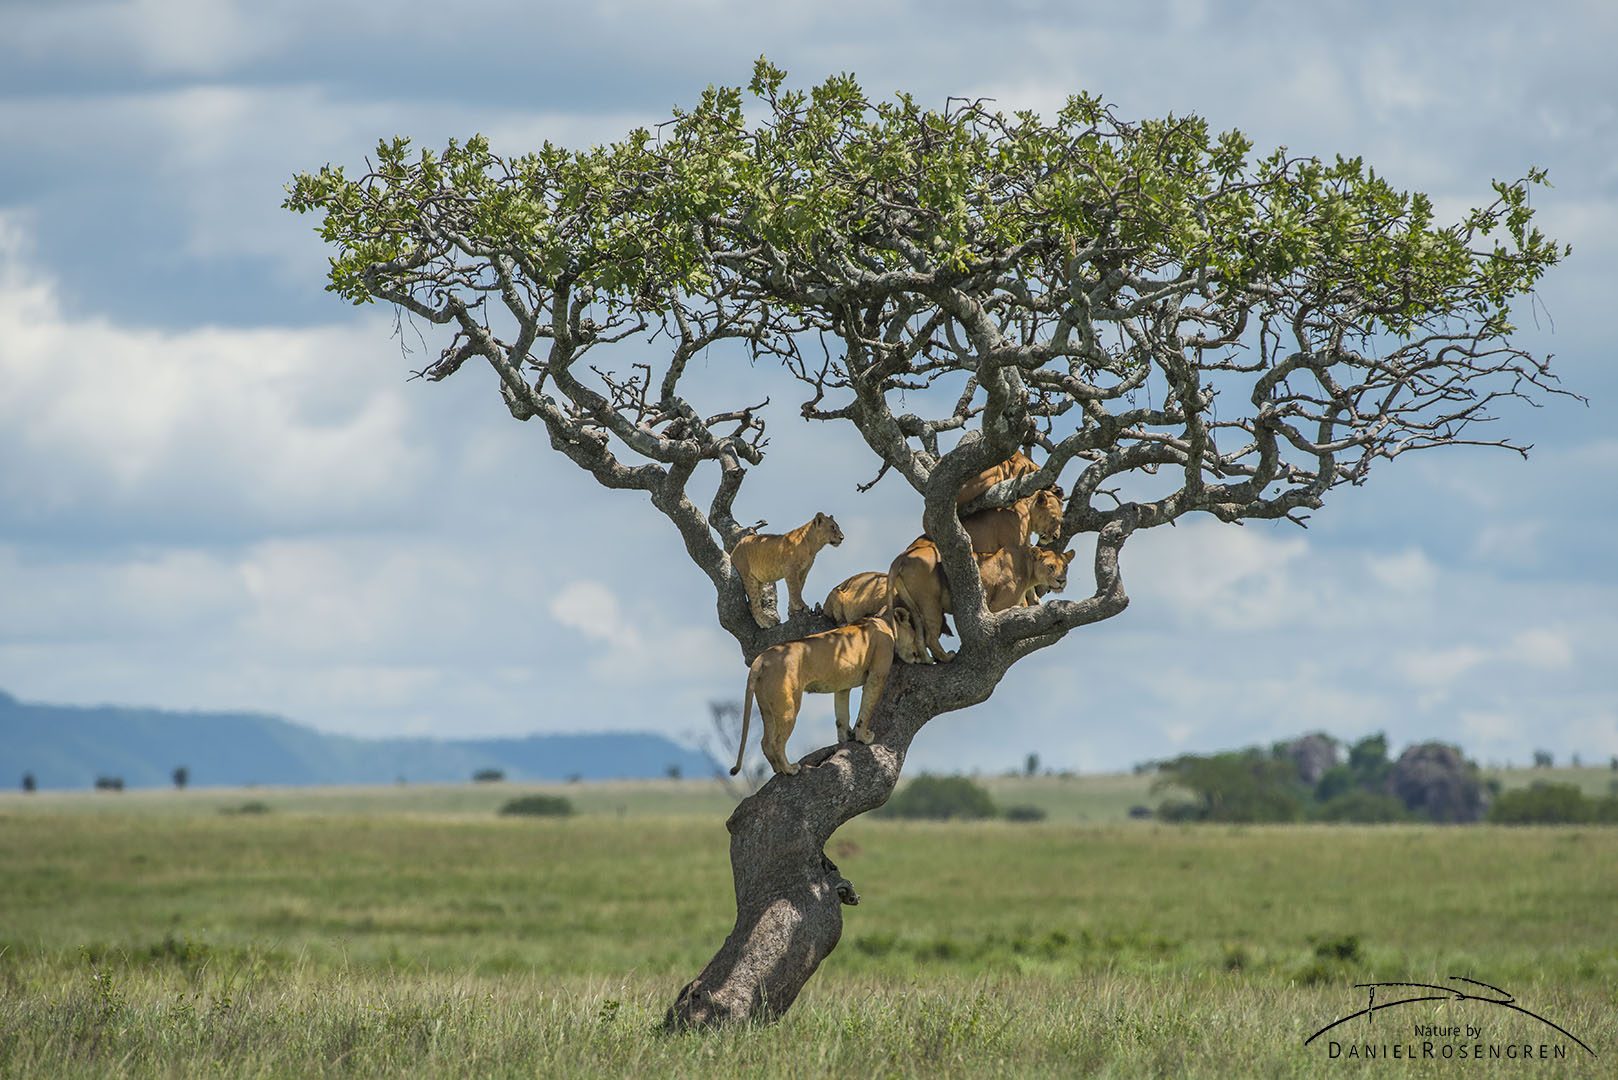 From a tree, the lions can keep an eye on their surroundings. © Daniel Rosengren